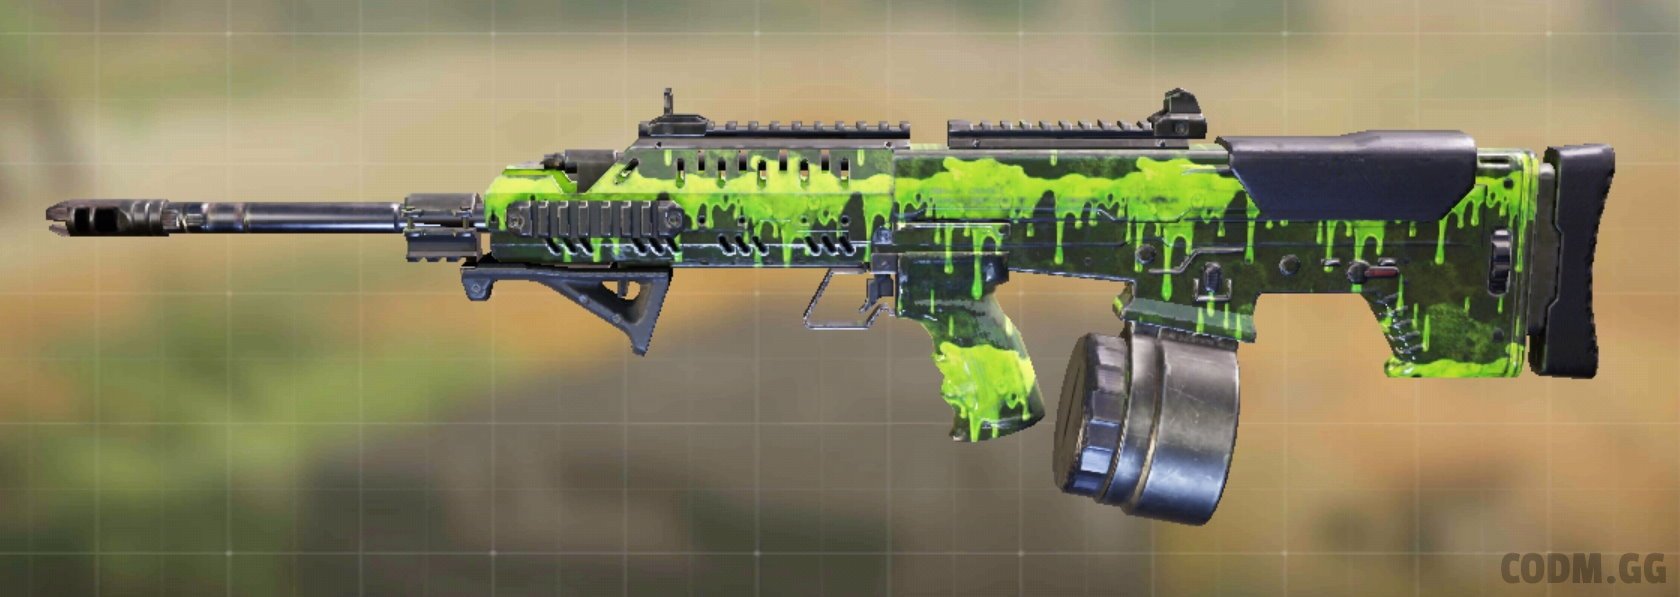 UL736 Contamination, Epic camo in Call of Duty Mobile